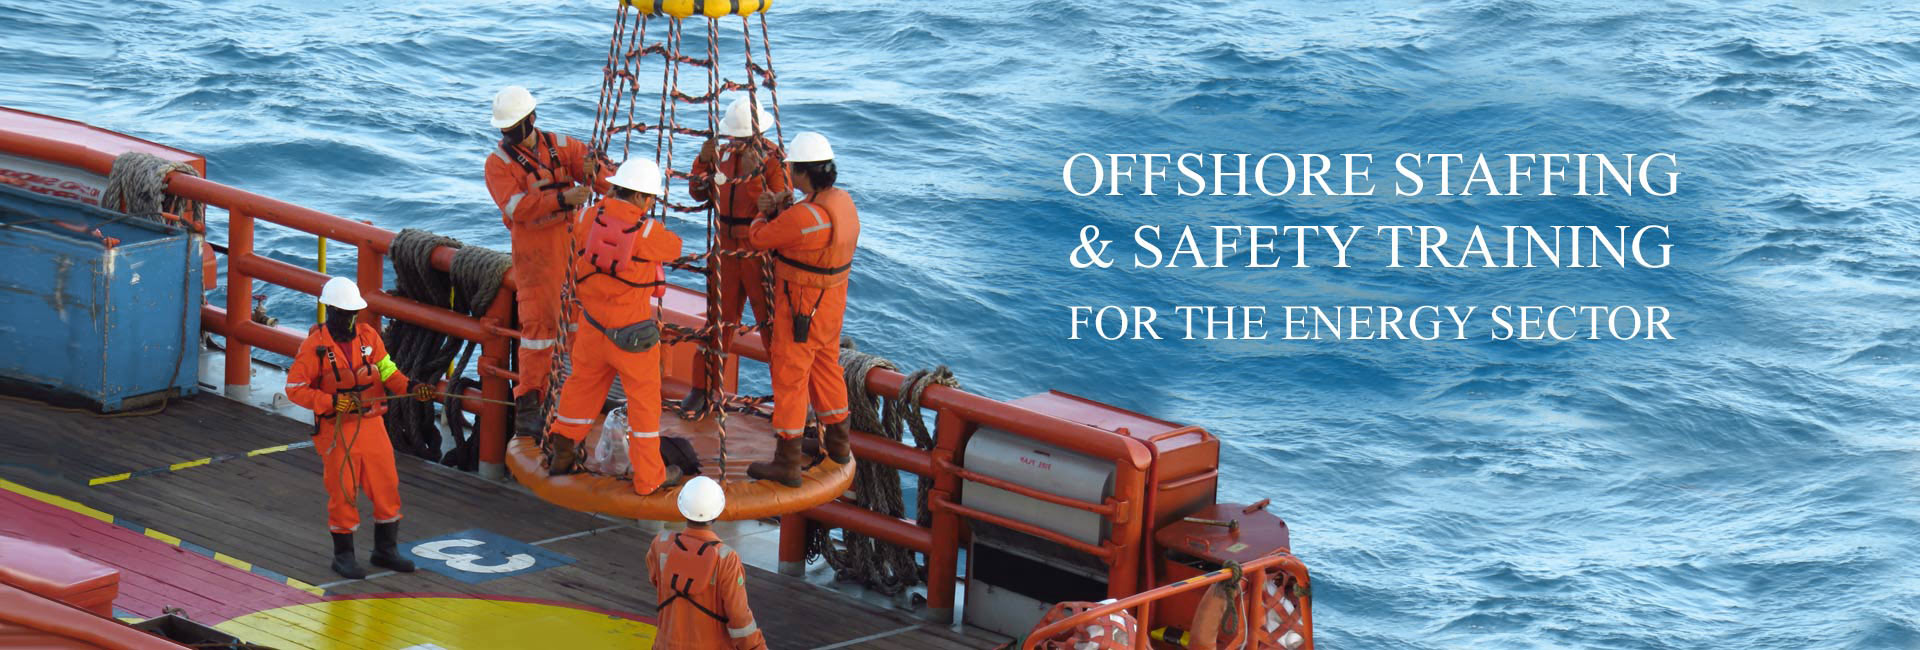 offshore safety training & staffing